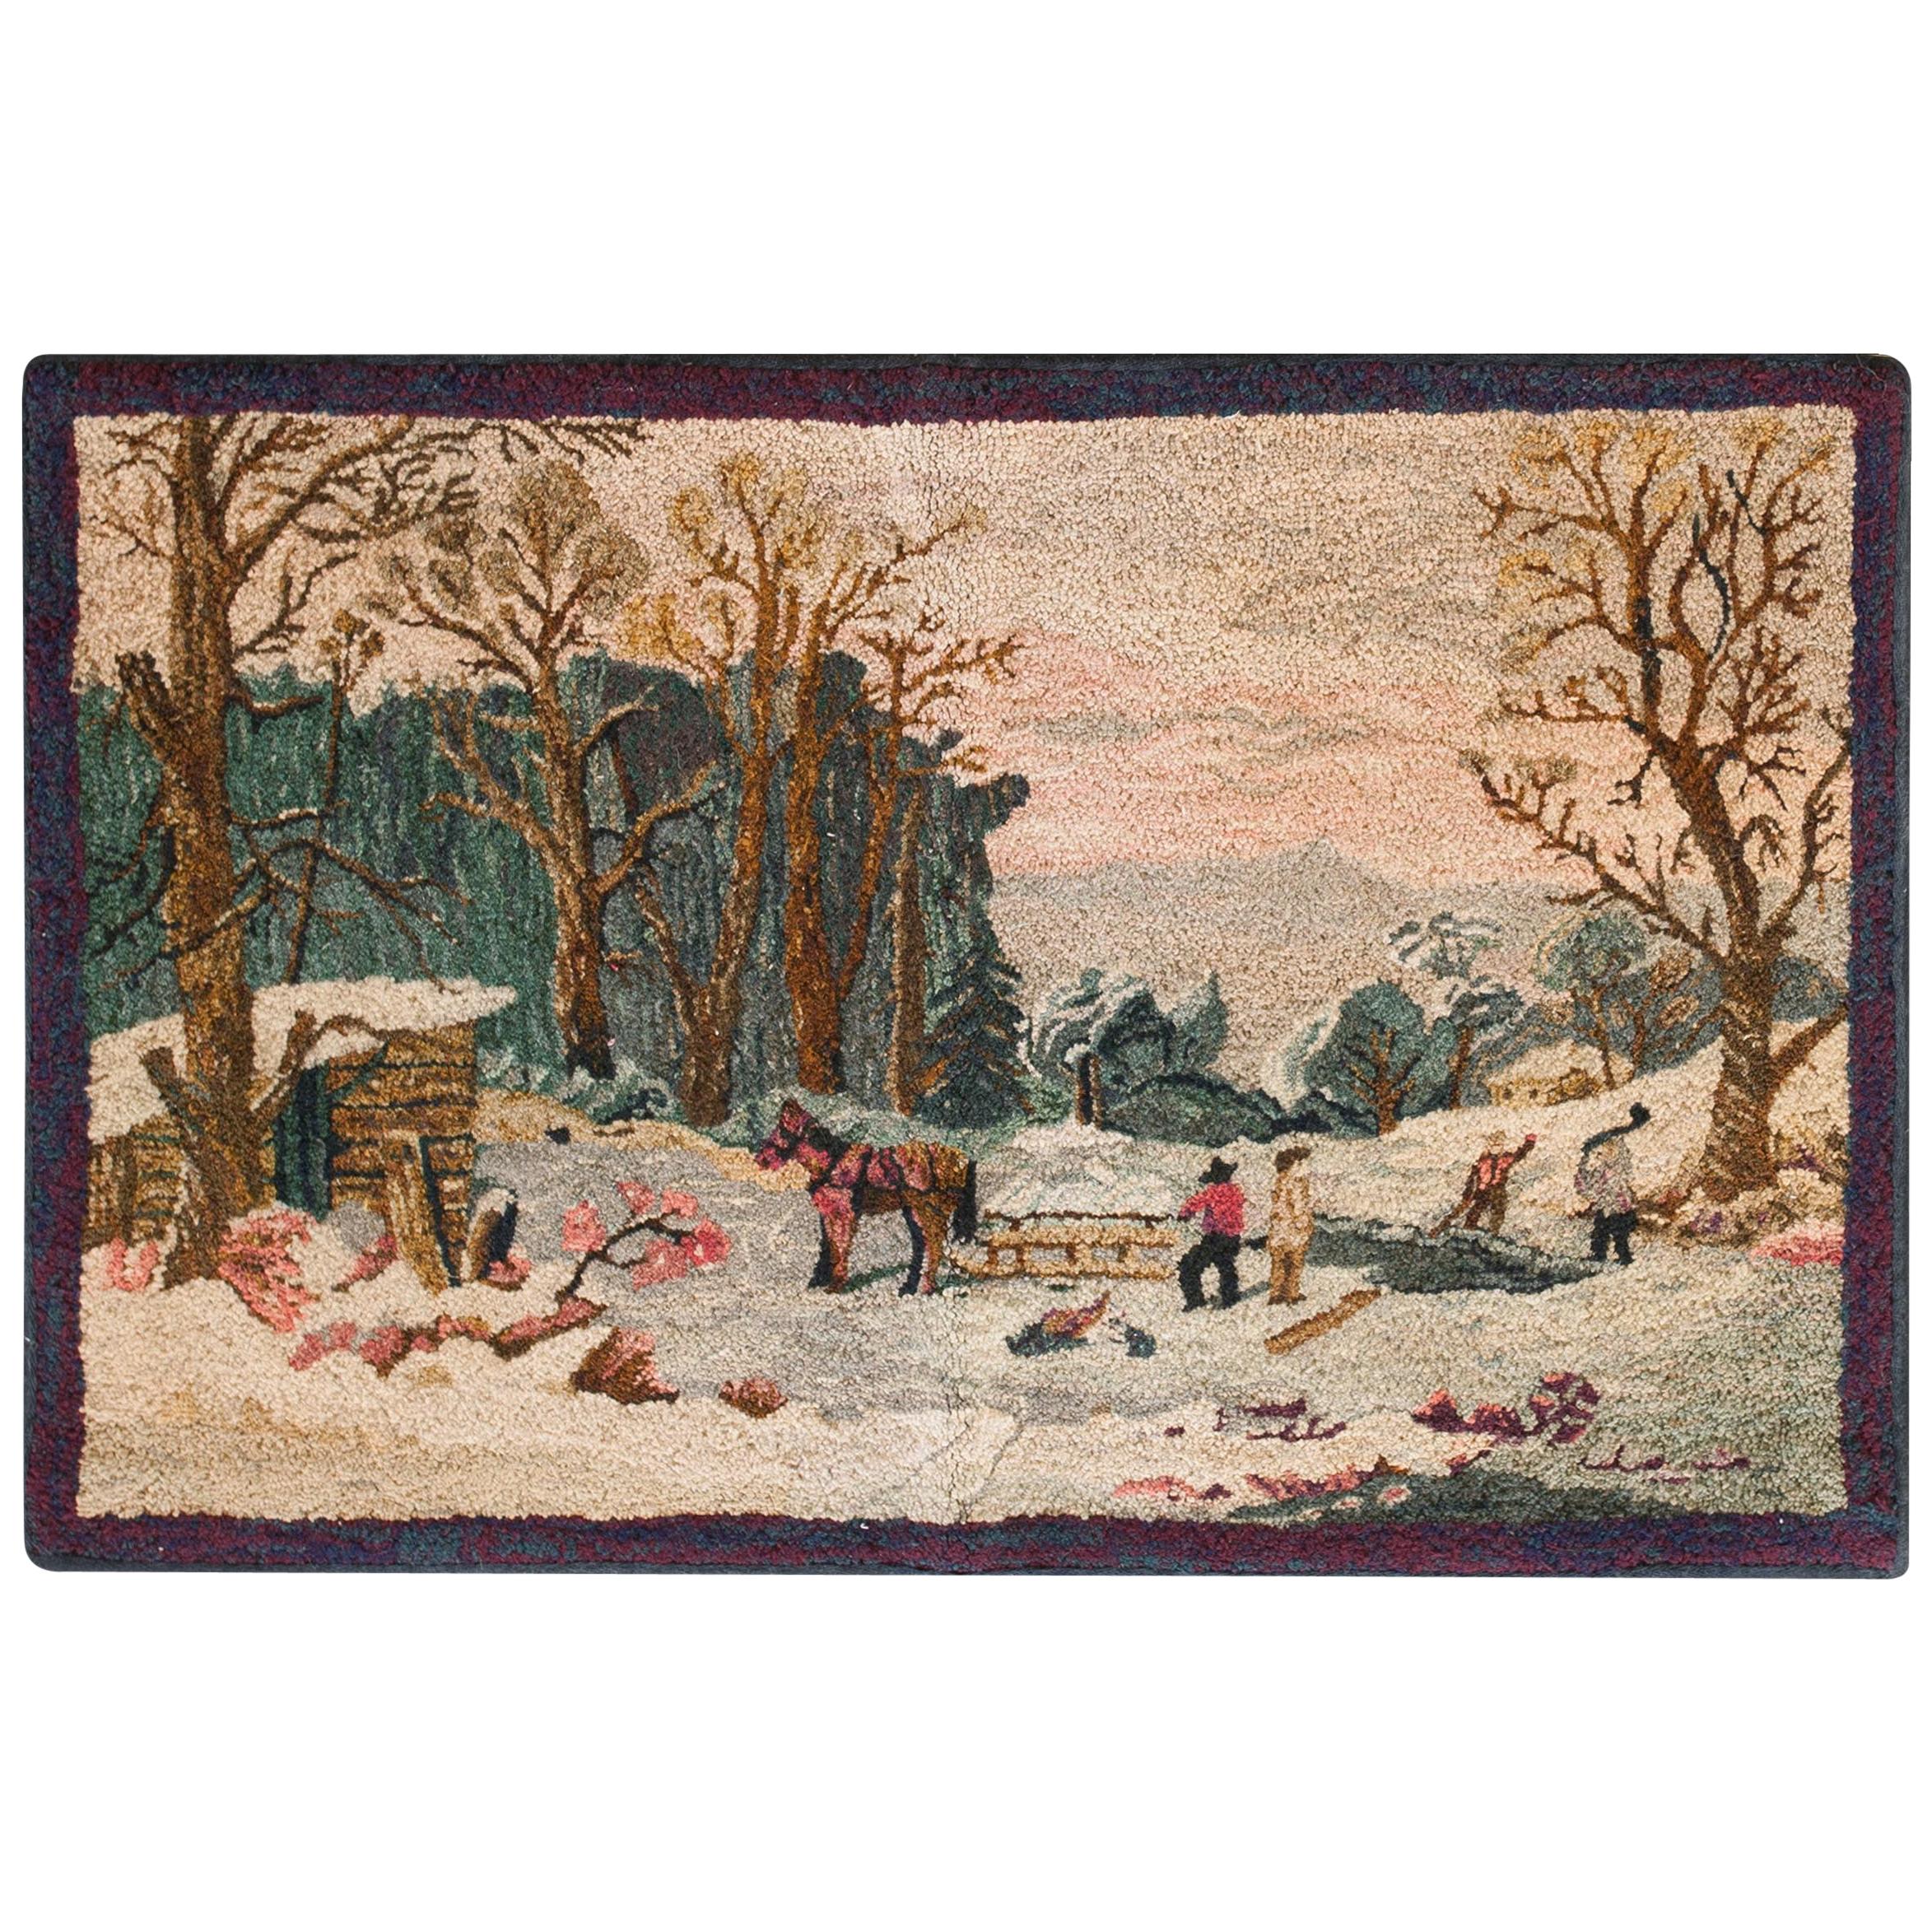 Mid 20th Century Pictorial American Hooked Rug (  1'10" x 2'10" - 56 x 86 ) For Sale